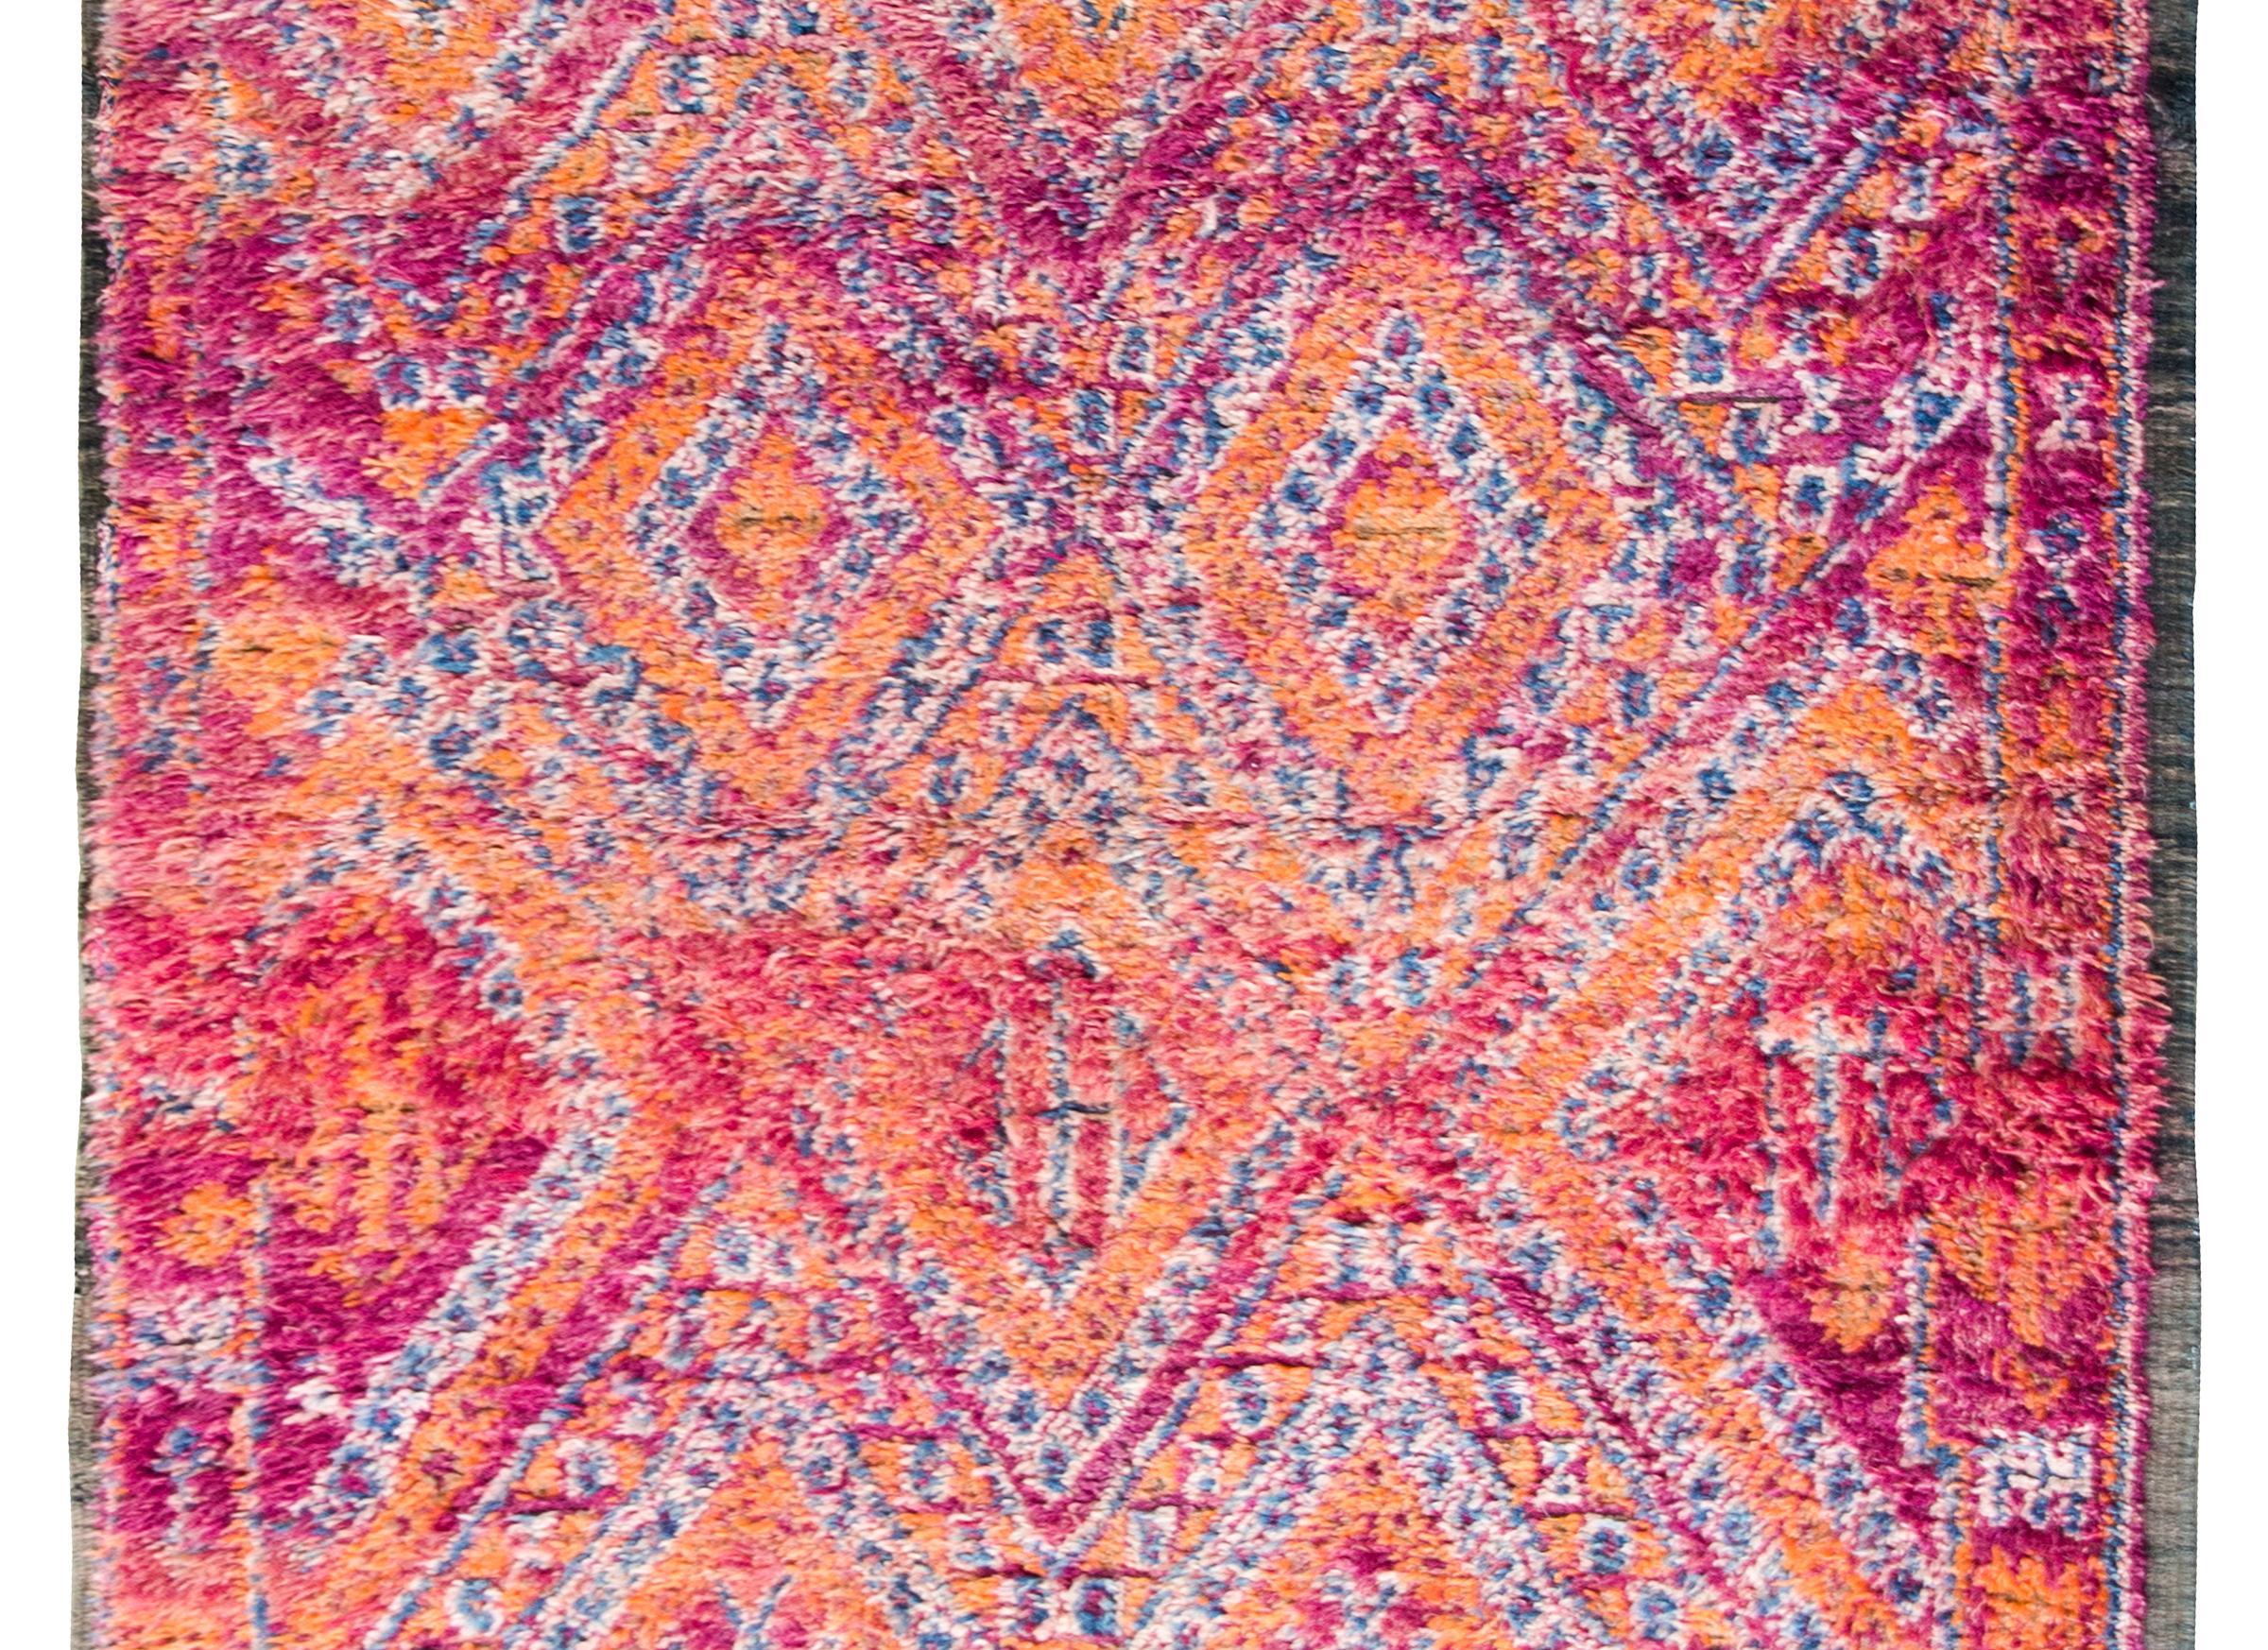 A bold and beatiful vintage Moroccan rug with a repeated diamond pattern surrounded by a repeated geometric patterned border, and all woven in bright oranges, fuchsias, and violets.